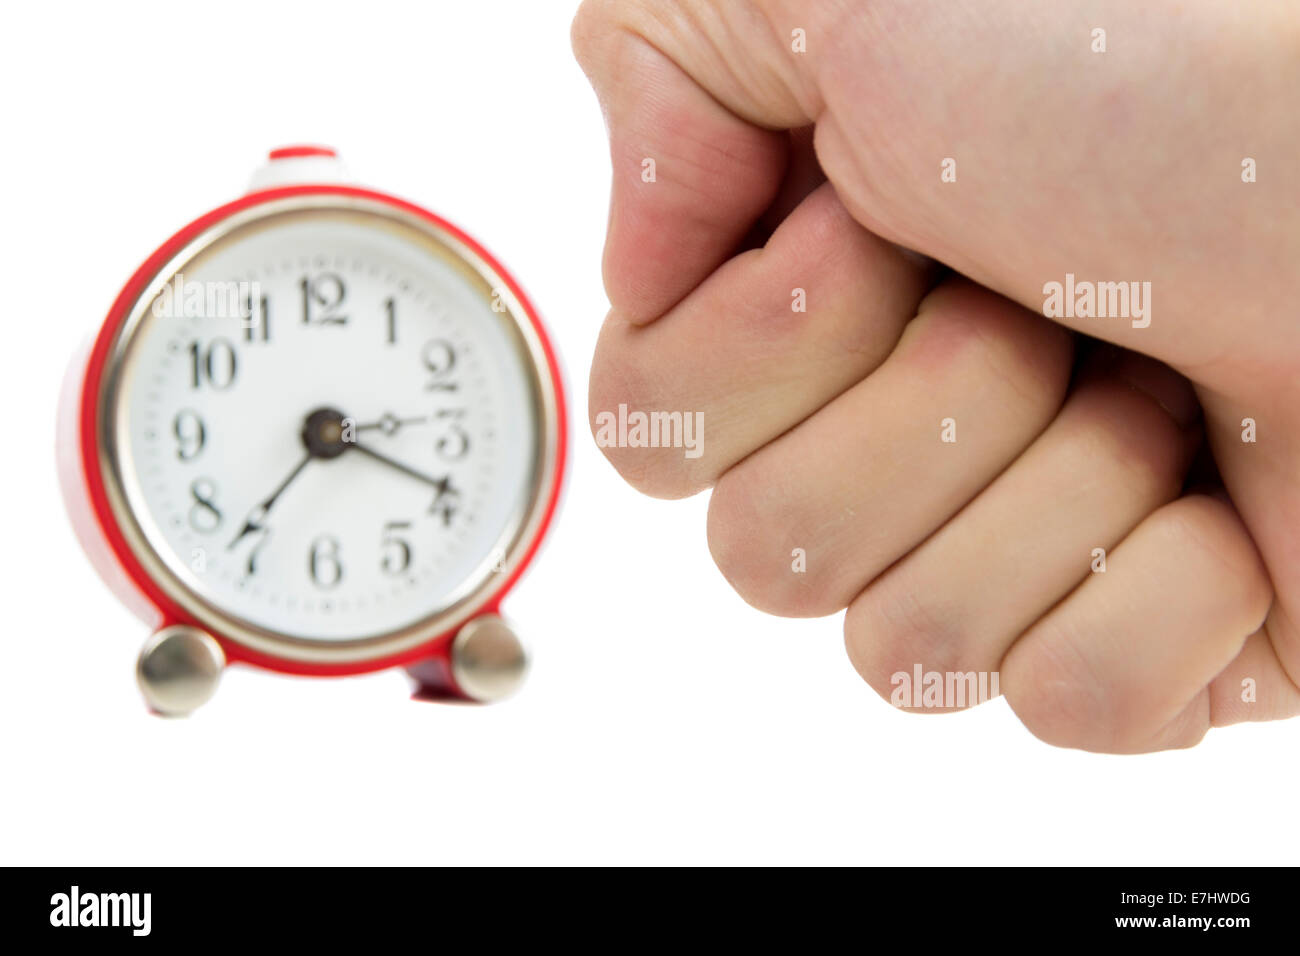 Man's hand in a fist about to hit a red alarm clock isolated on white Stock Photo